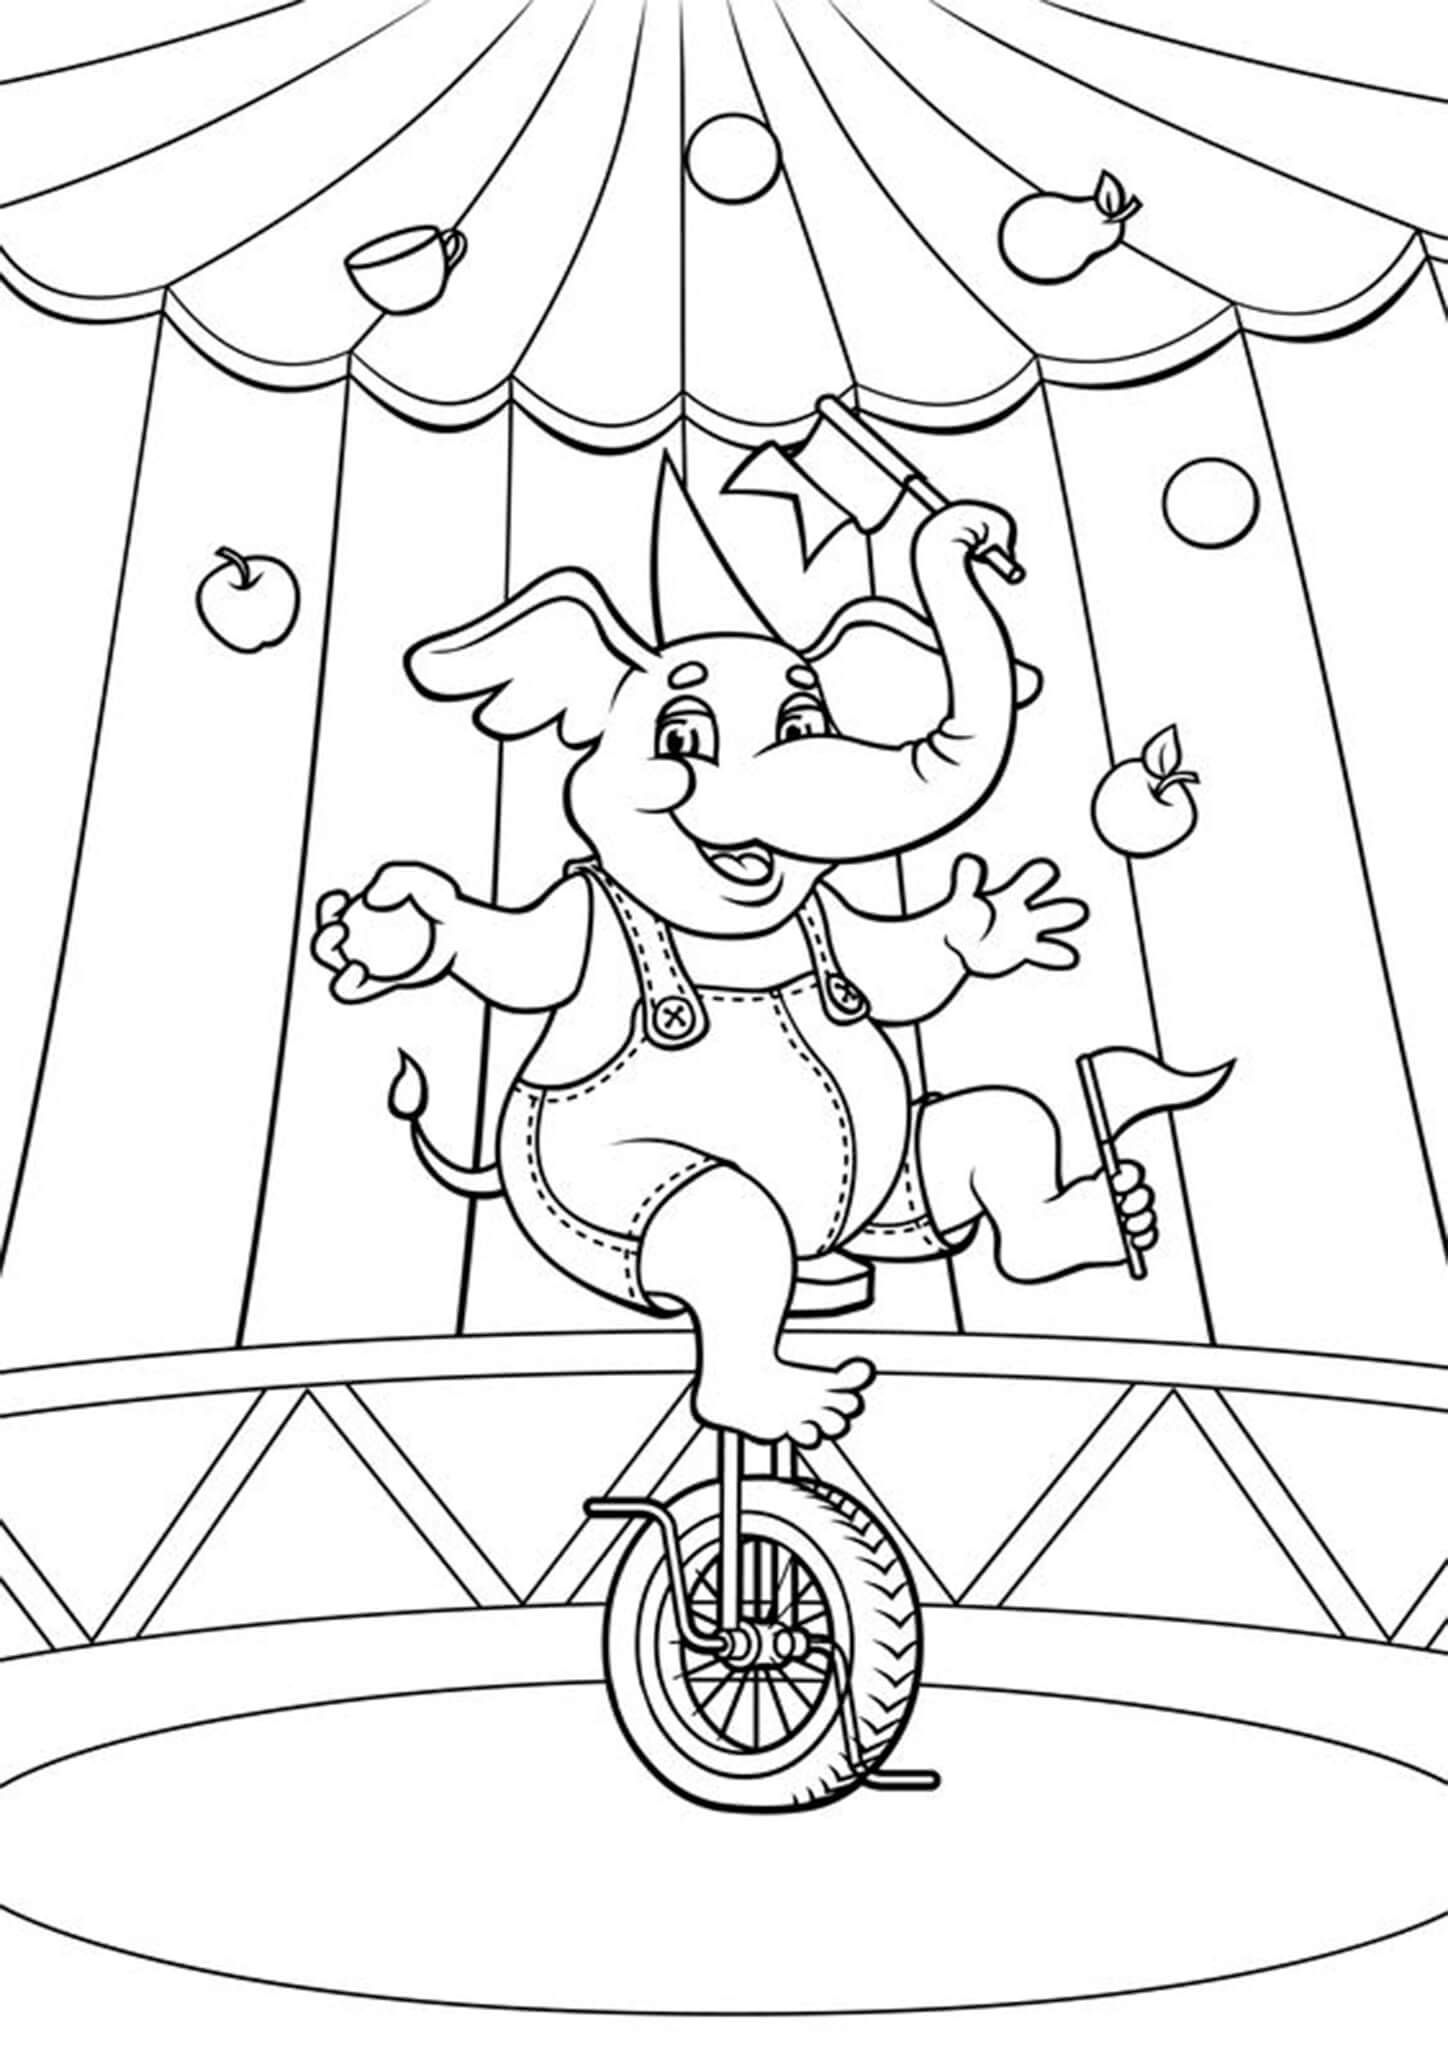 Free easy to print circus coloring pages coloring books coloring pages animal coloring pages